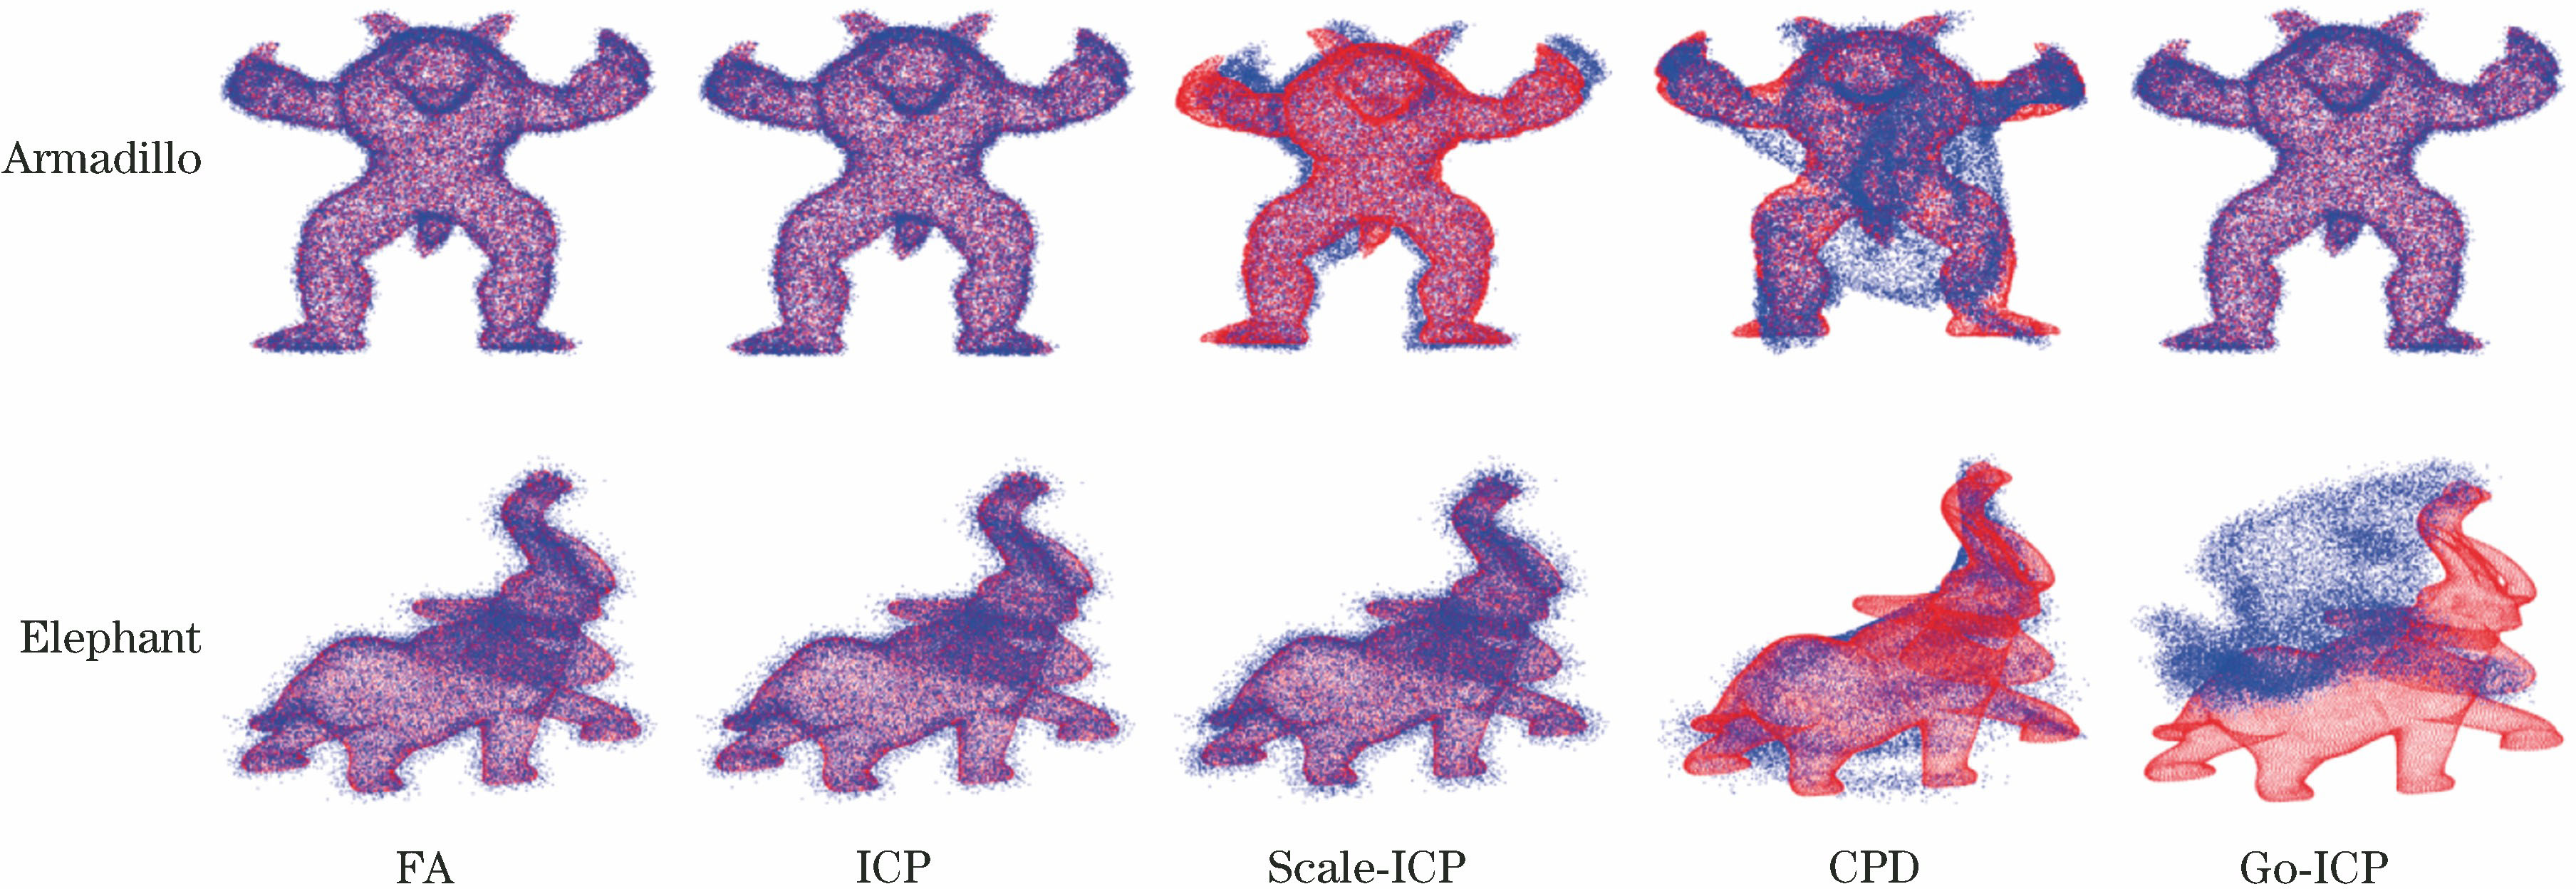 Registration effects of Armadillo and Elephant point clouds by five algorithms